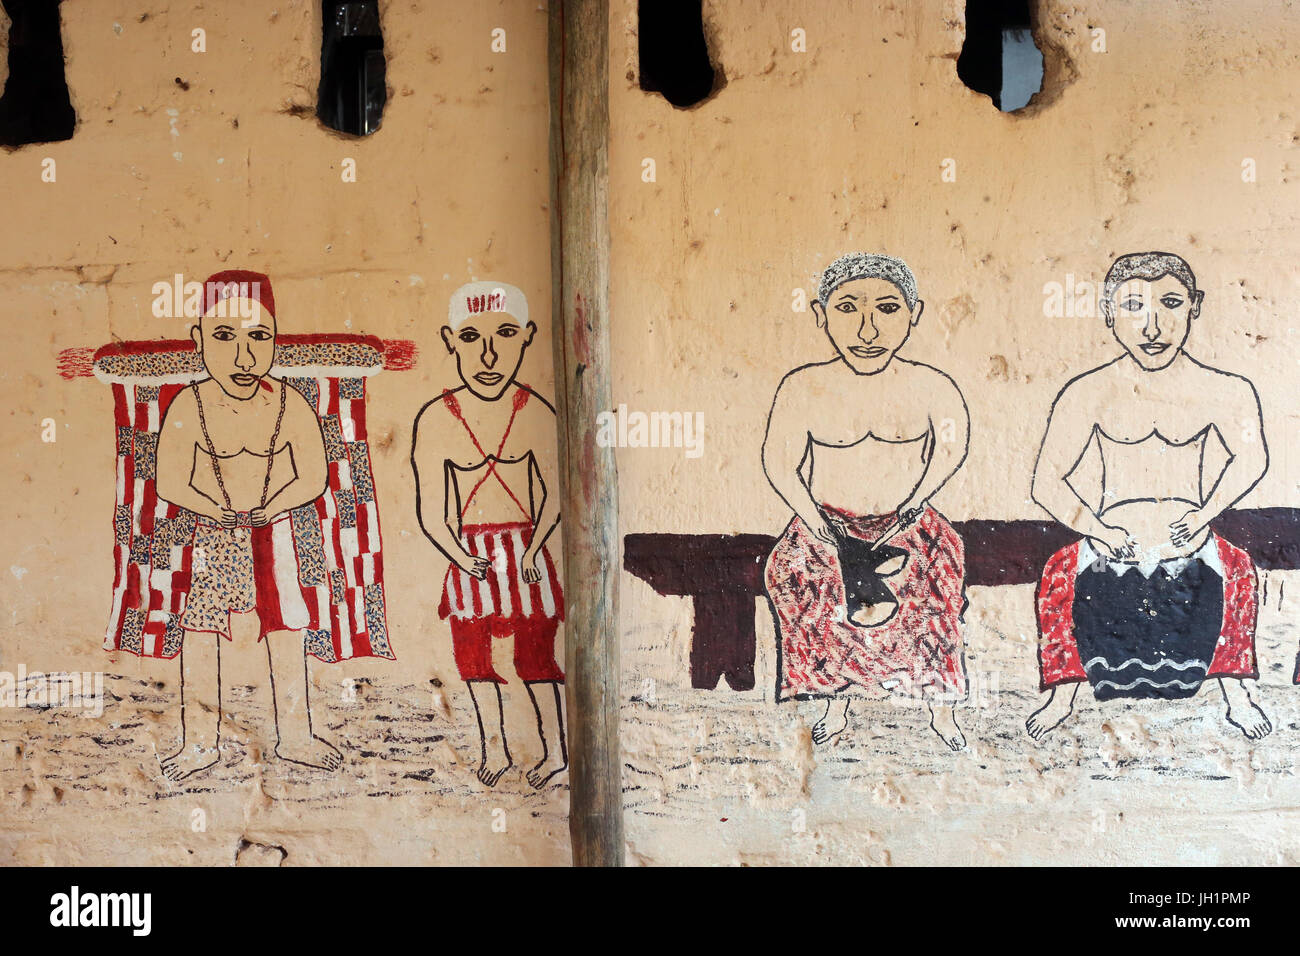 Voodoo wall painting on a convent. Togoville, Togo. Stock Photo